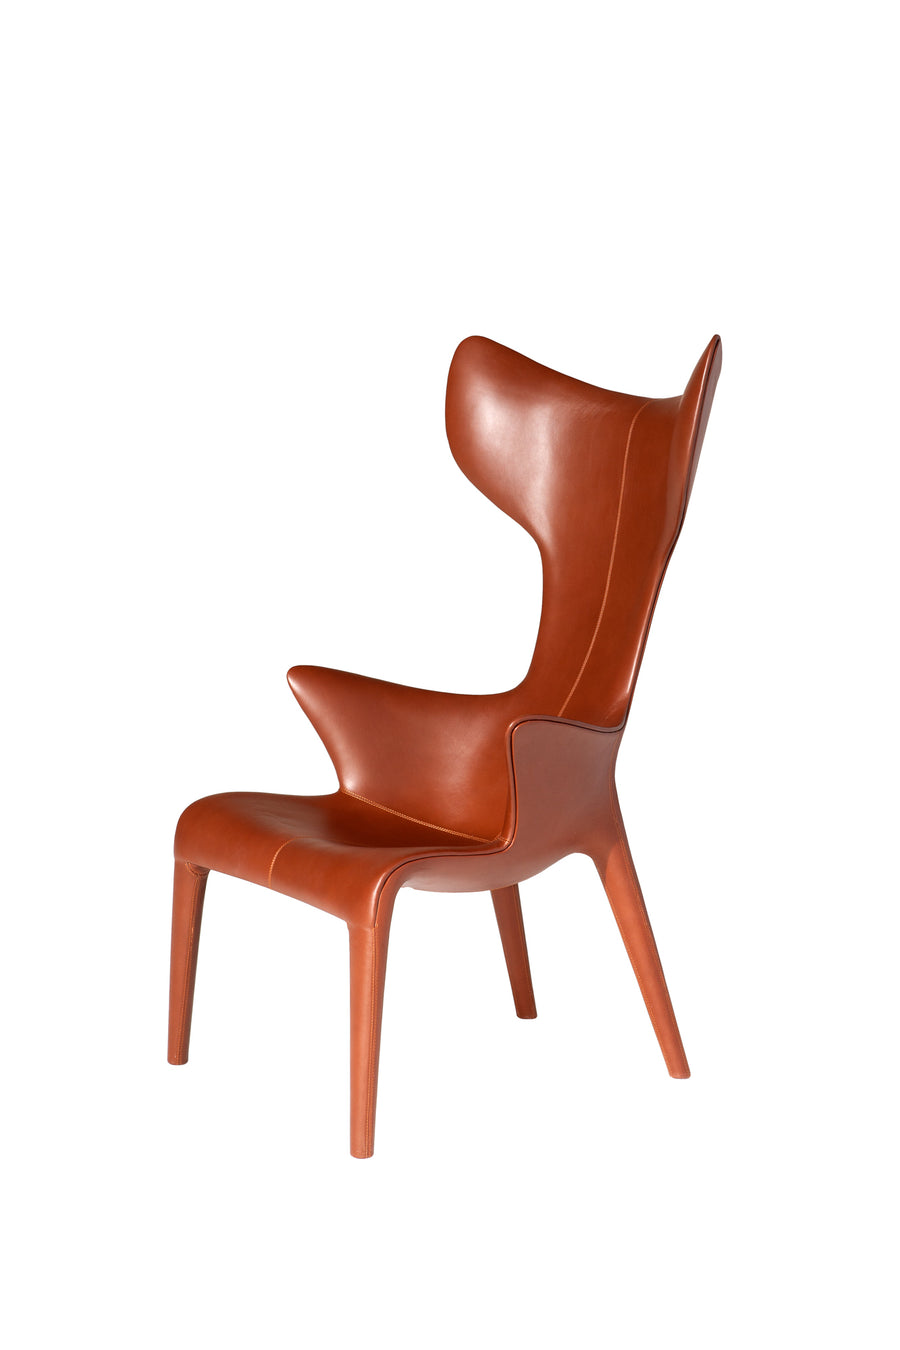 LOU READ Armchair by Philippe Starck with Eugeni Quitllet for Driade - DUPLEX DESIGN